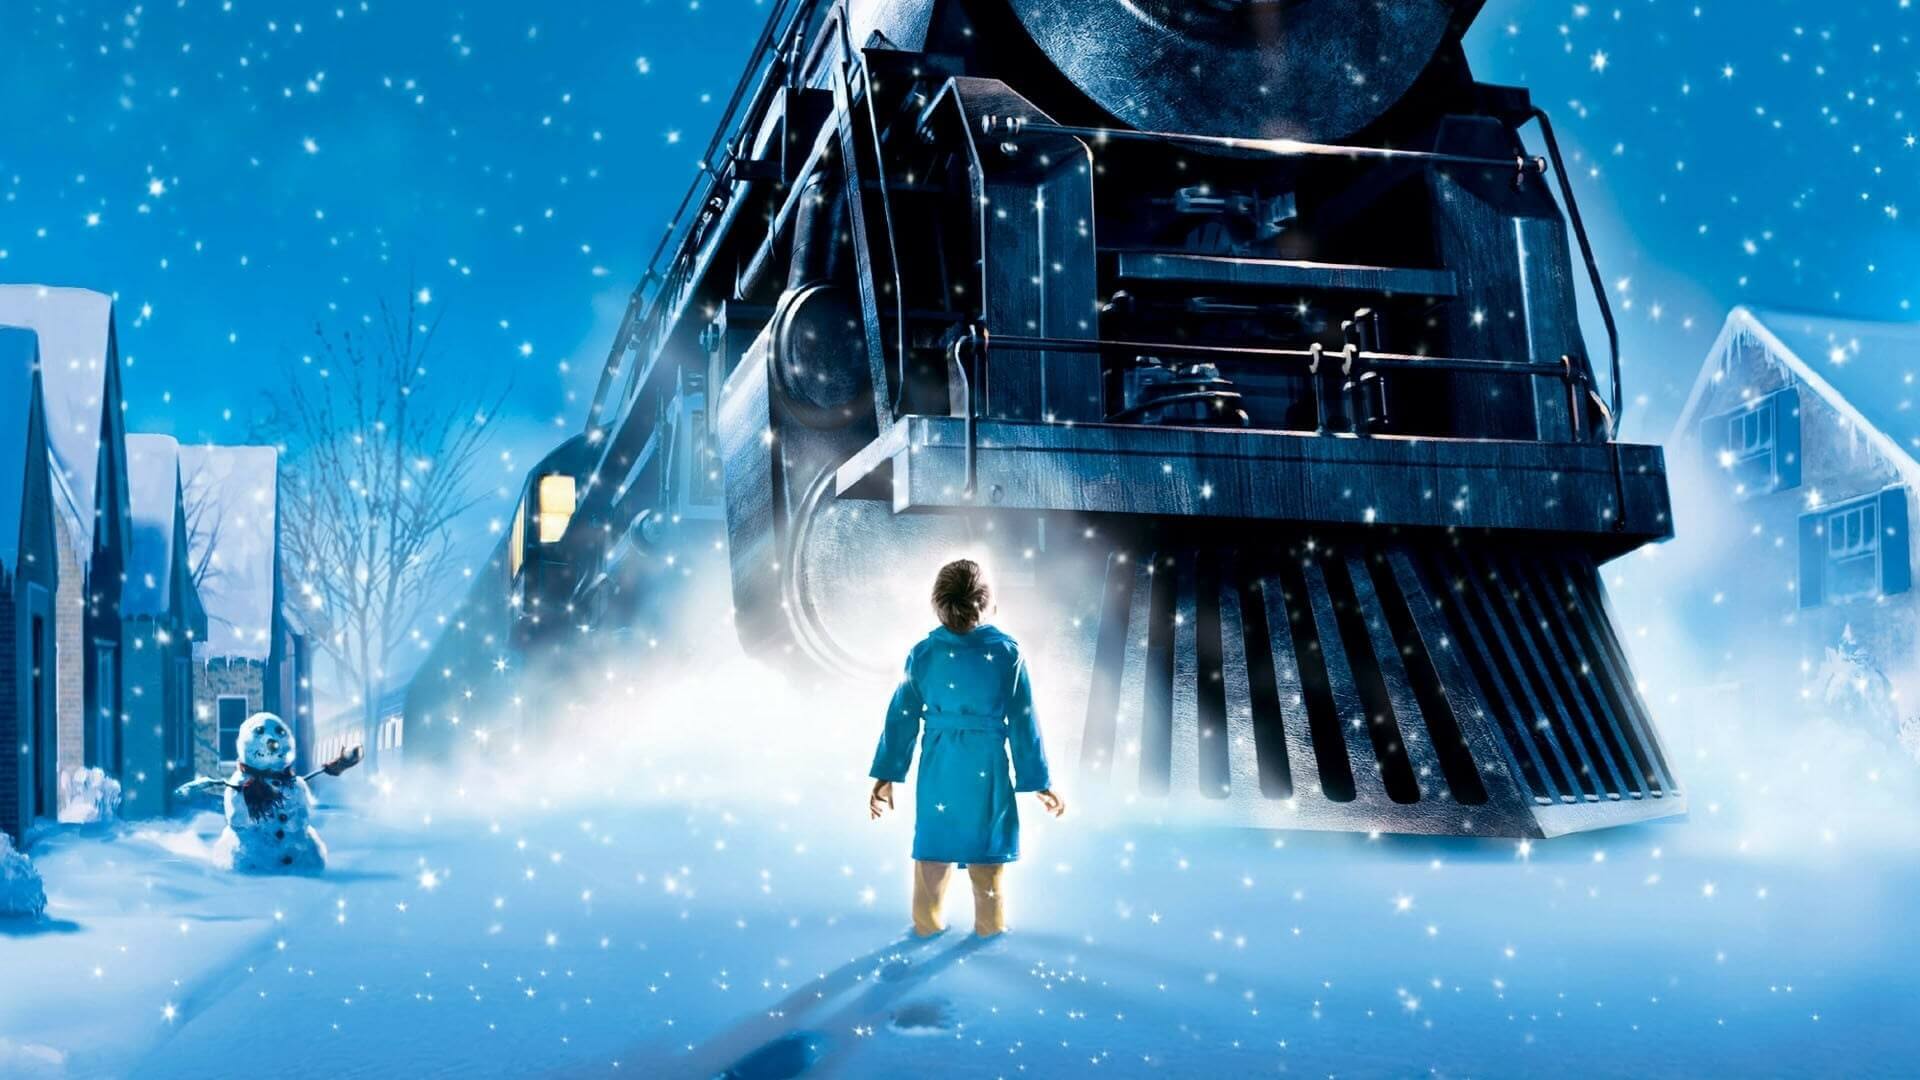 Don't miss the chance to experience this holiday classic on the big screen.